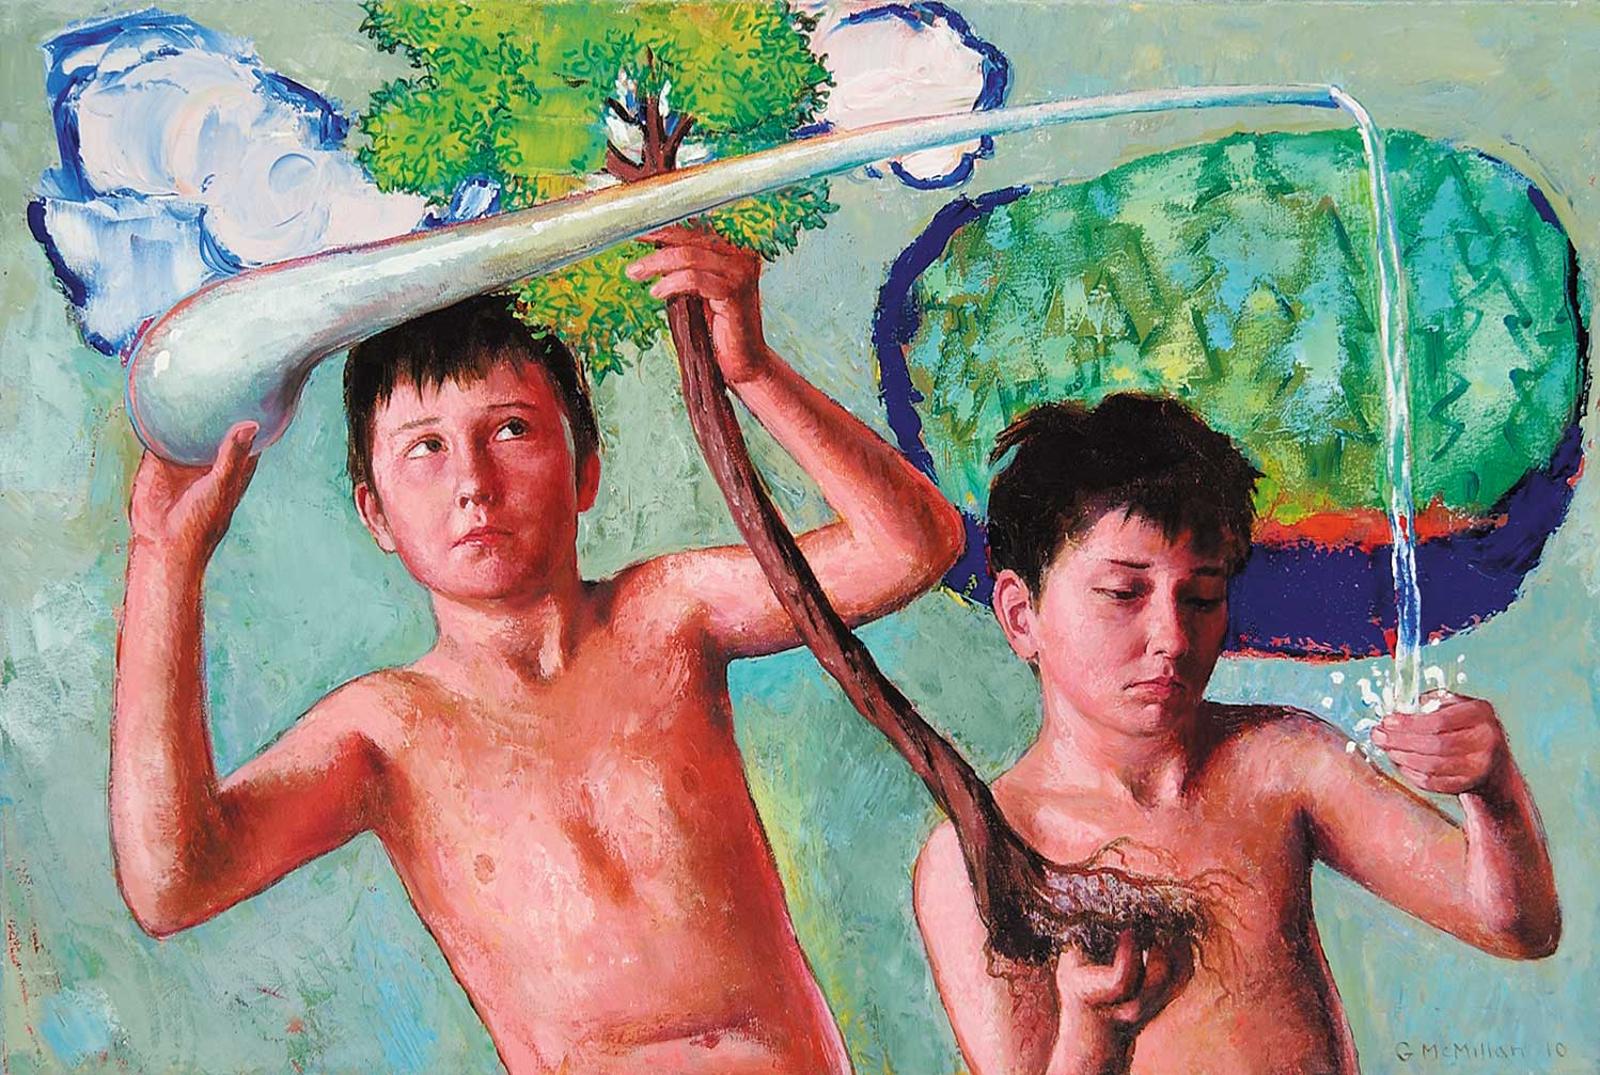 Gary McMillan - Untitled - The Two Kids and the Water